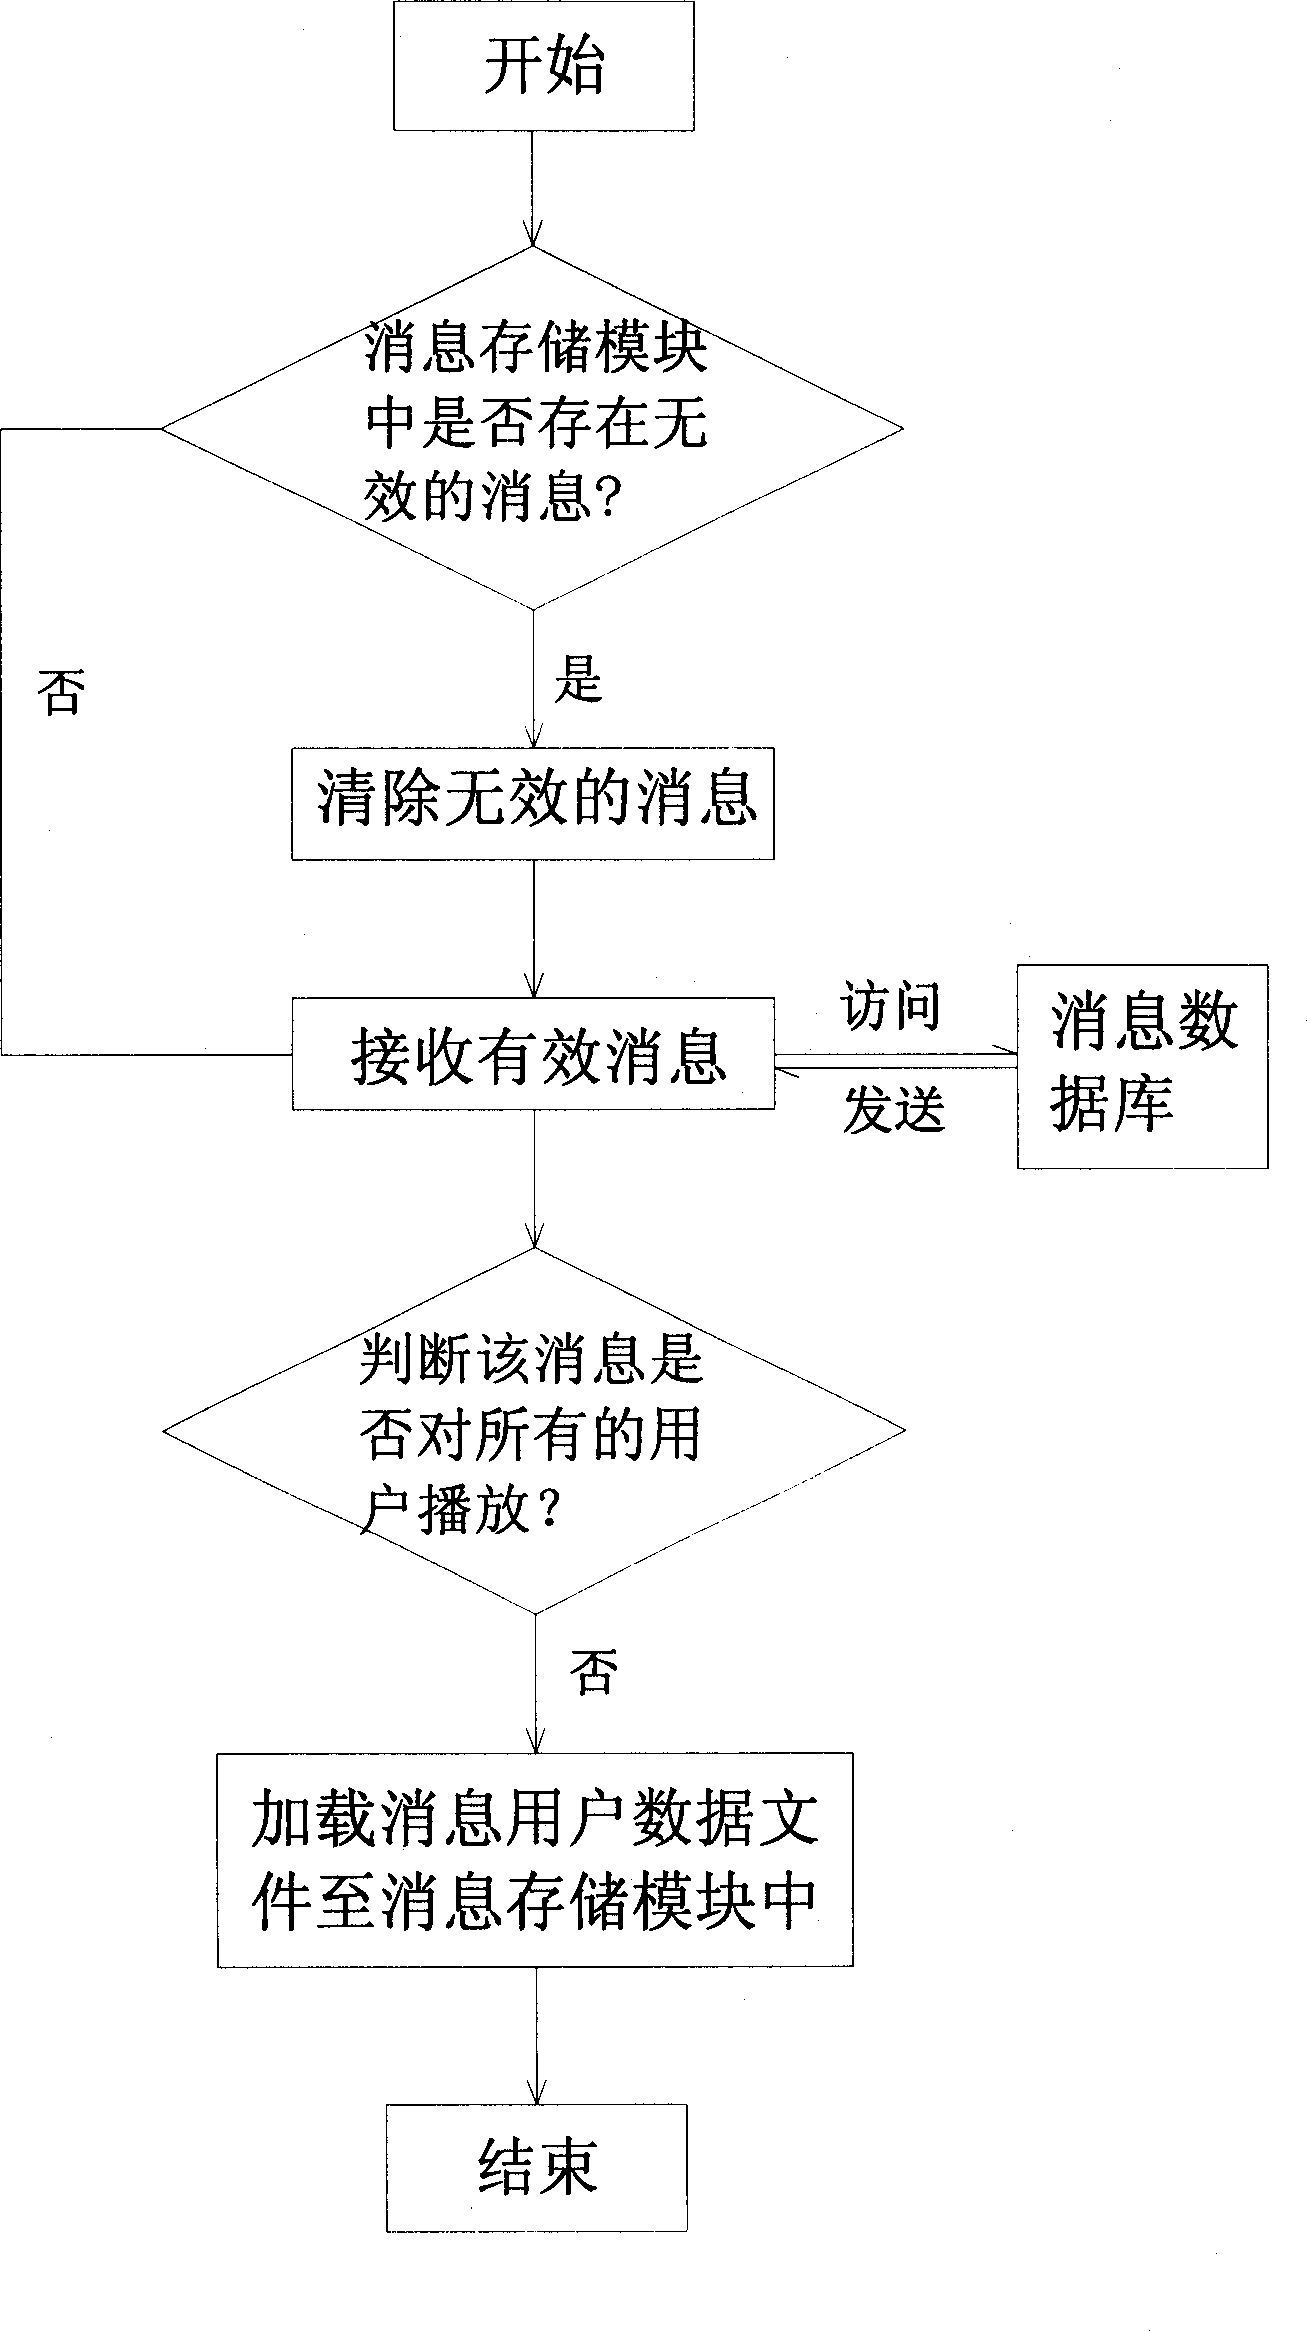 Information sending method and system for instant communication tool